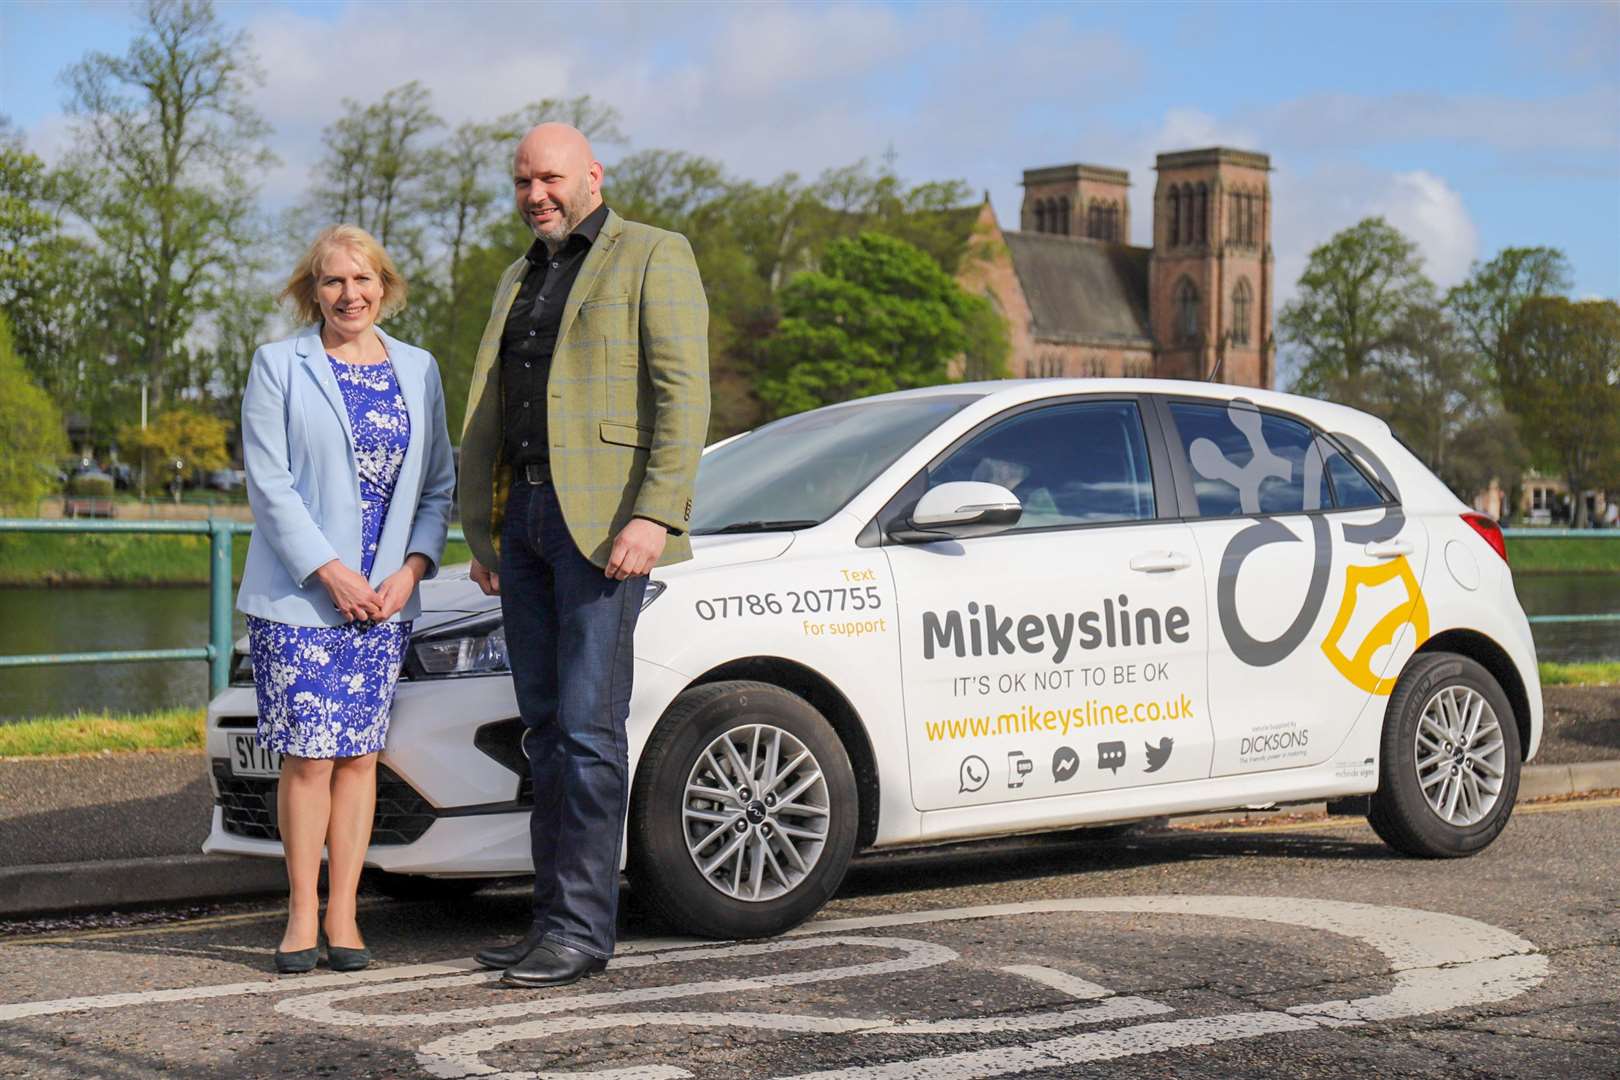 Dicksons's boss Fraser Bryce and Emily Stokes, CEO of Mikeysline.